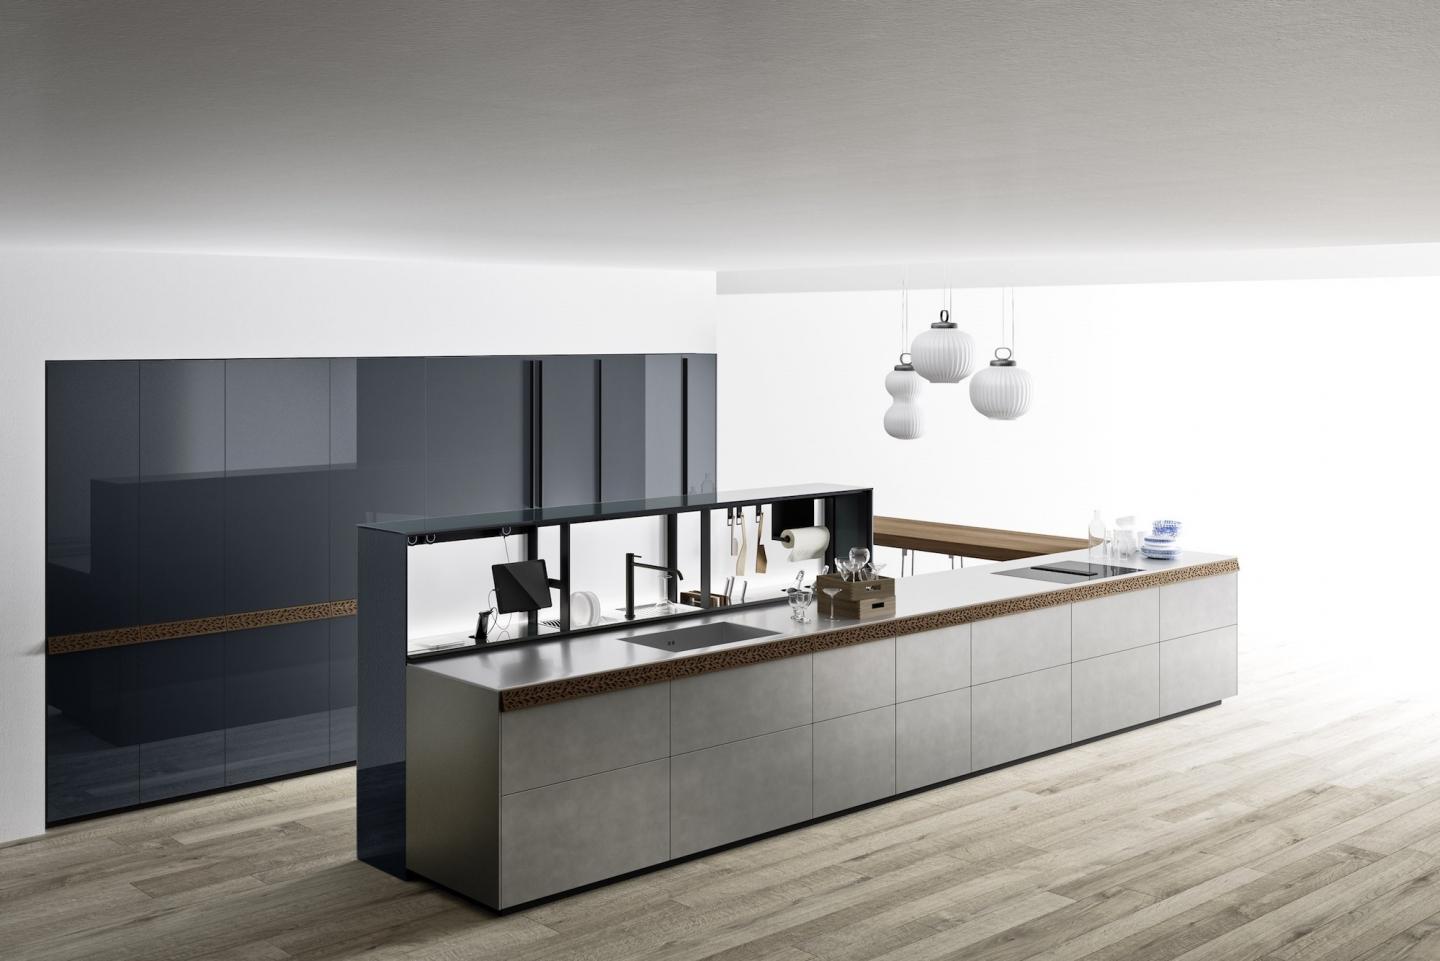 Italian handcrafted expertise stands out in the Genius Loci series